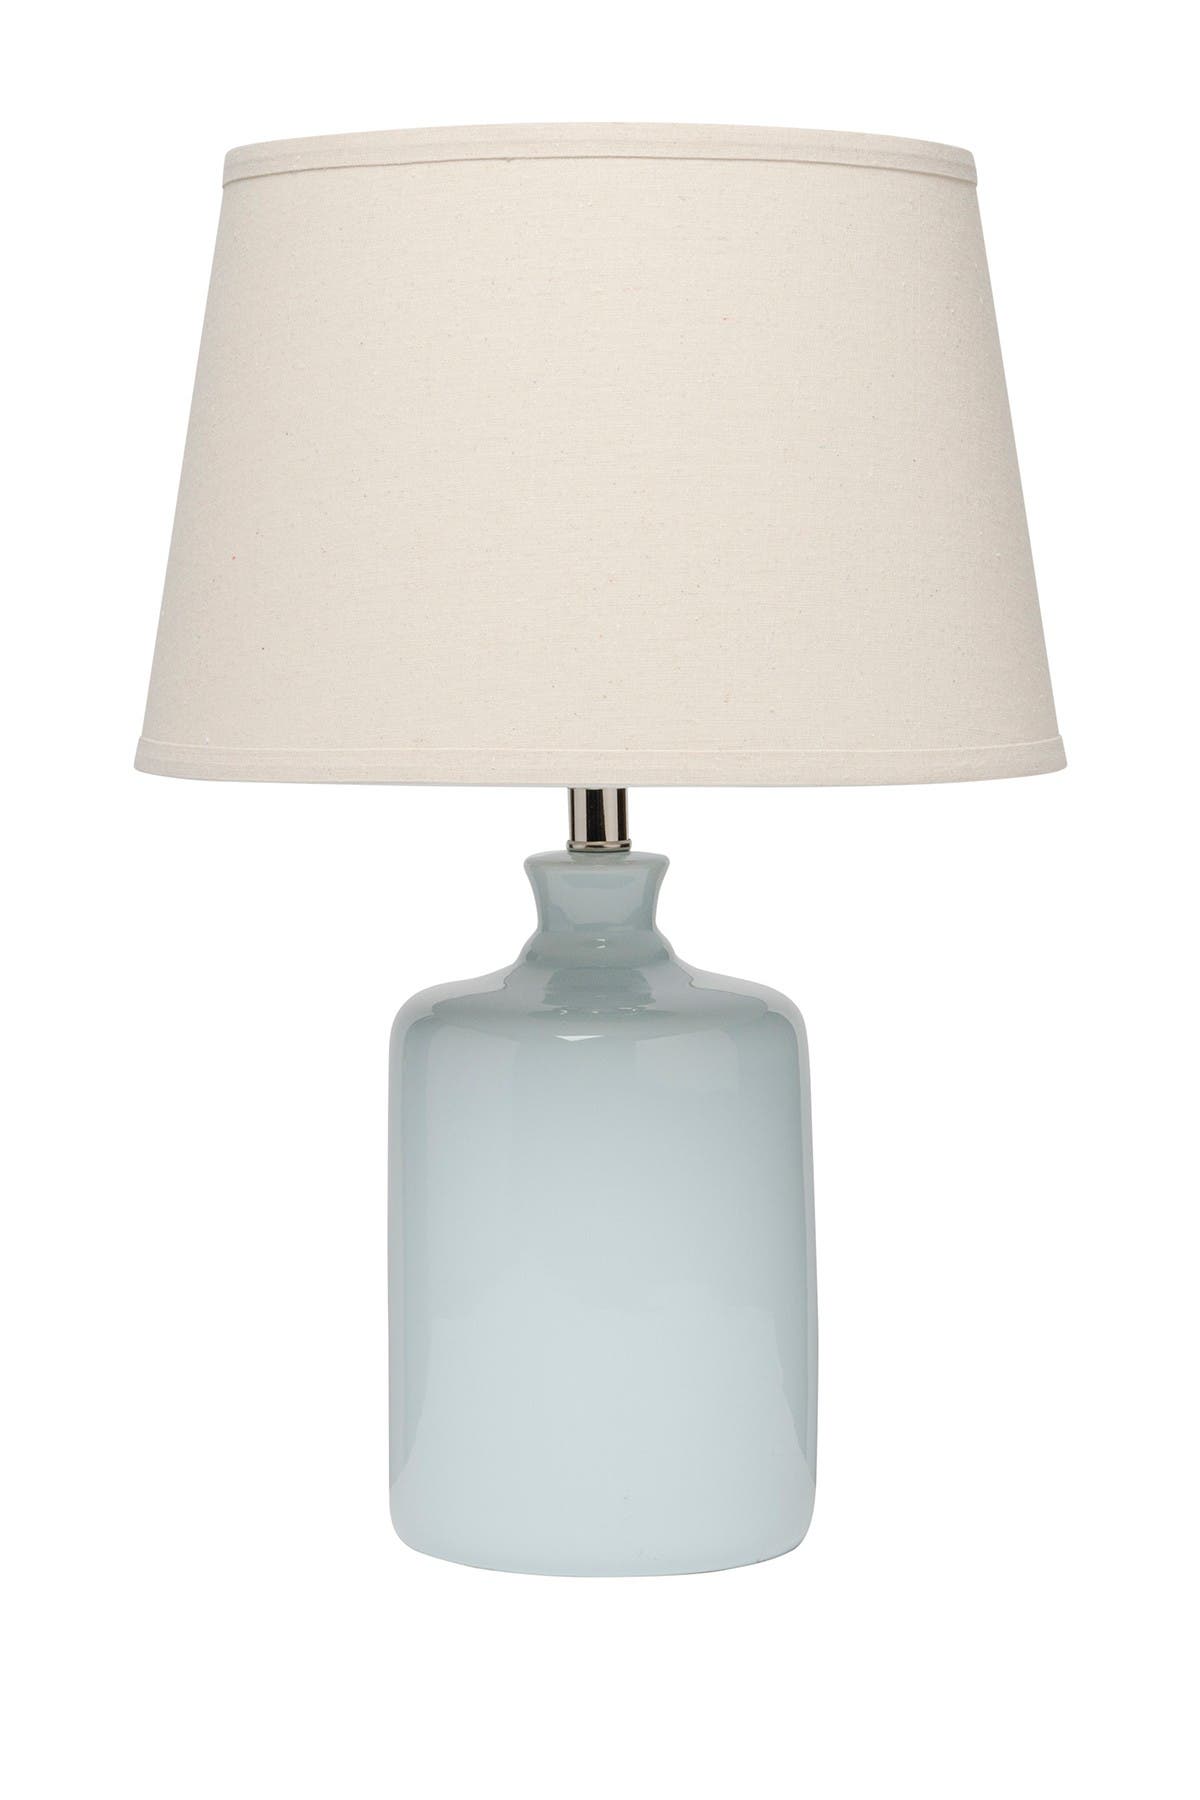 Jamie Young Light Blue Tapered Shade, Milk Jug Glass Table Lamp